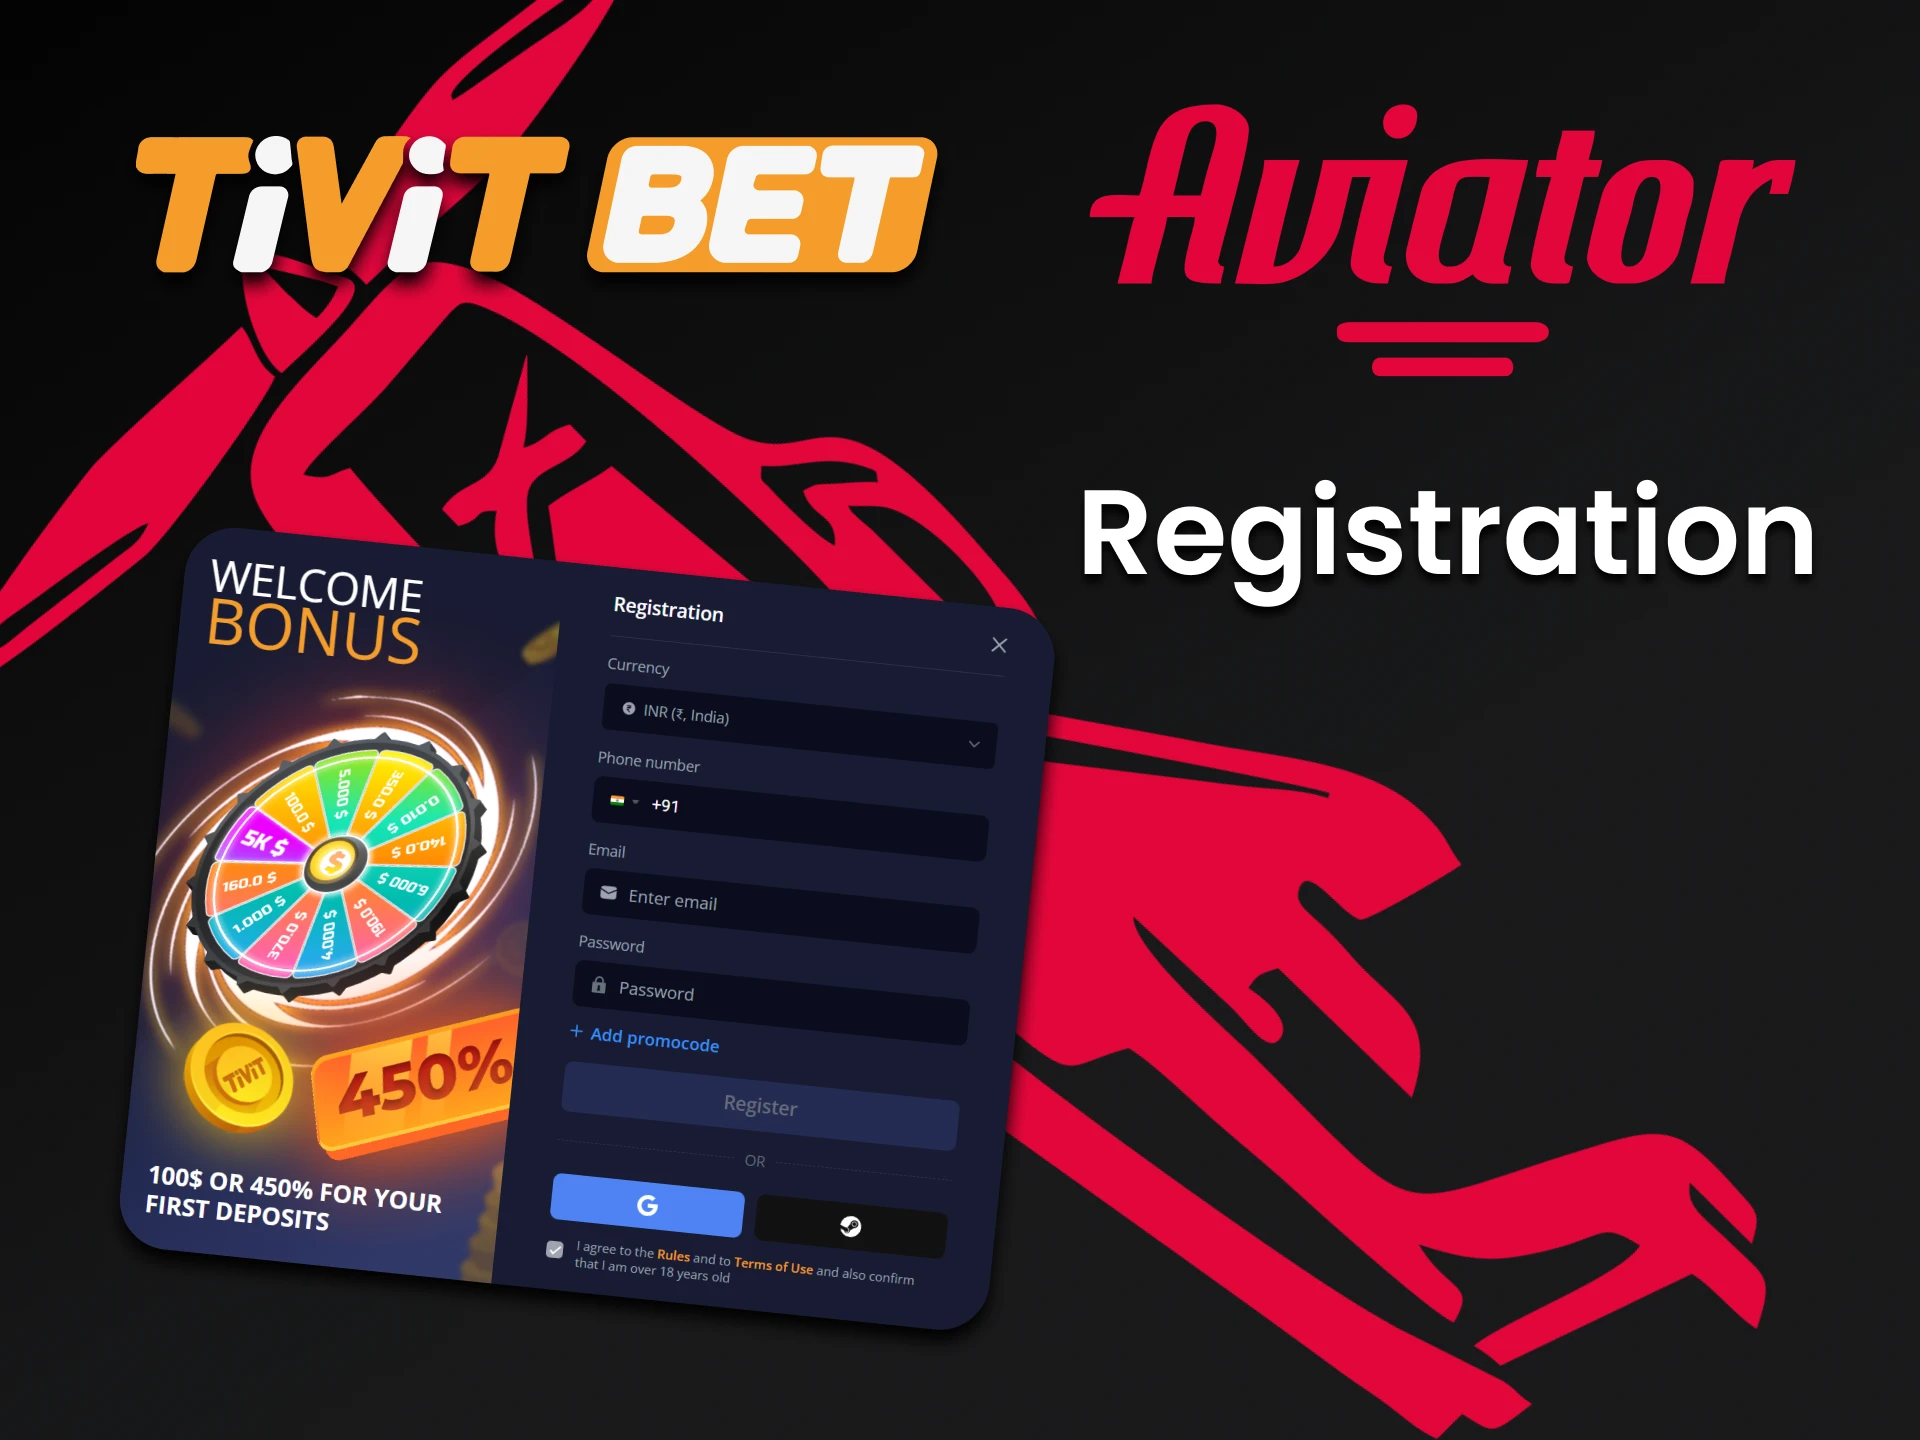 Be sure to register on Tivitbet to play Aviator.